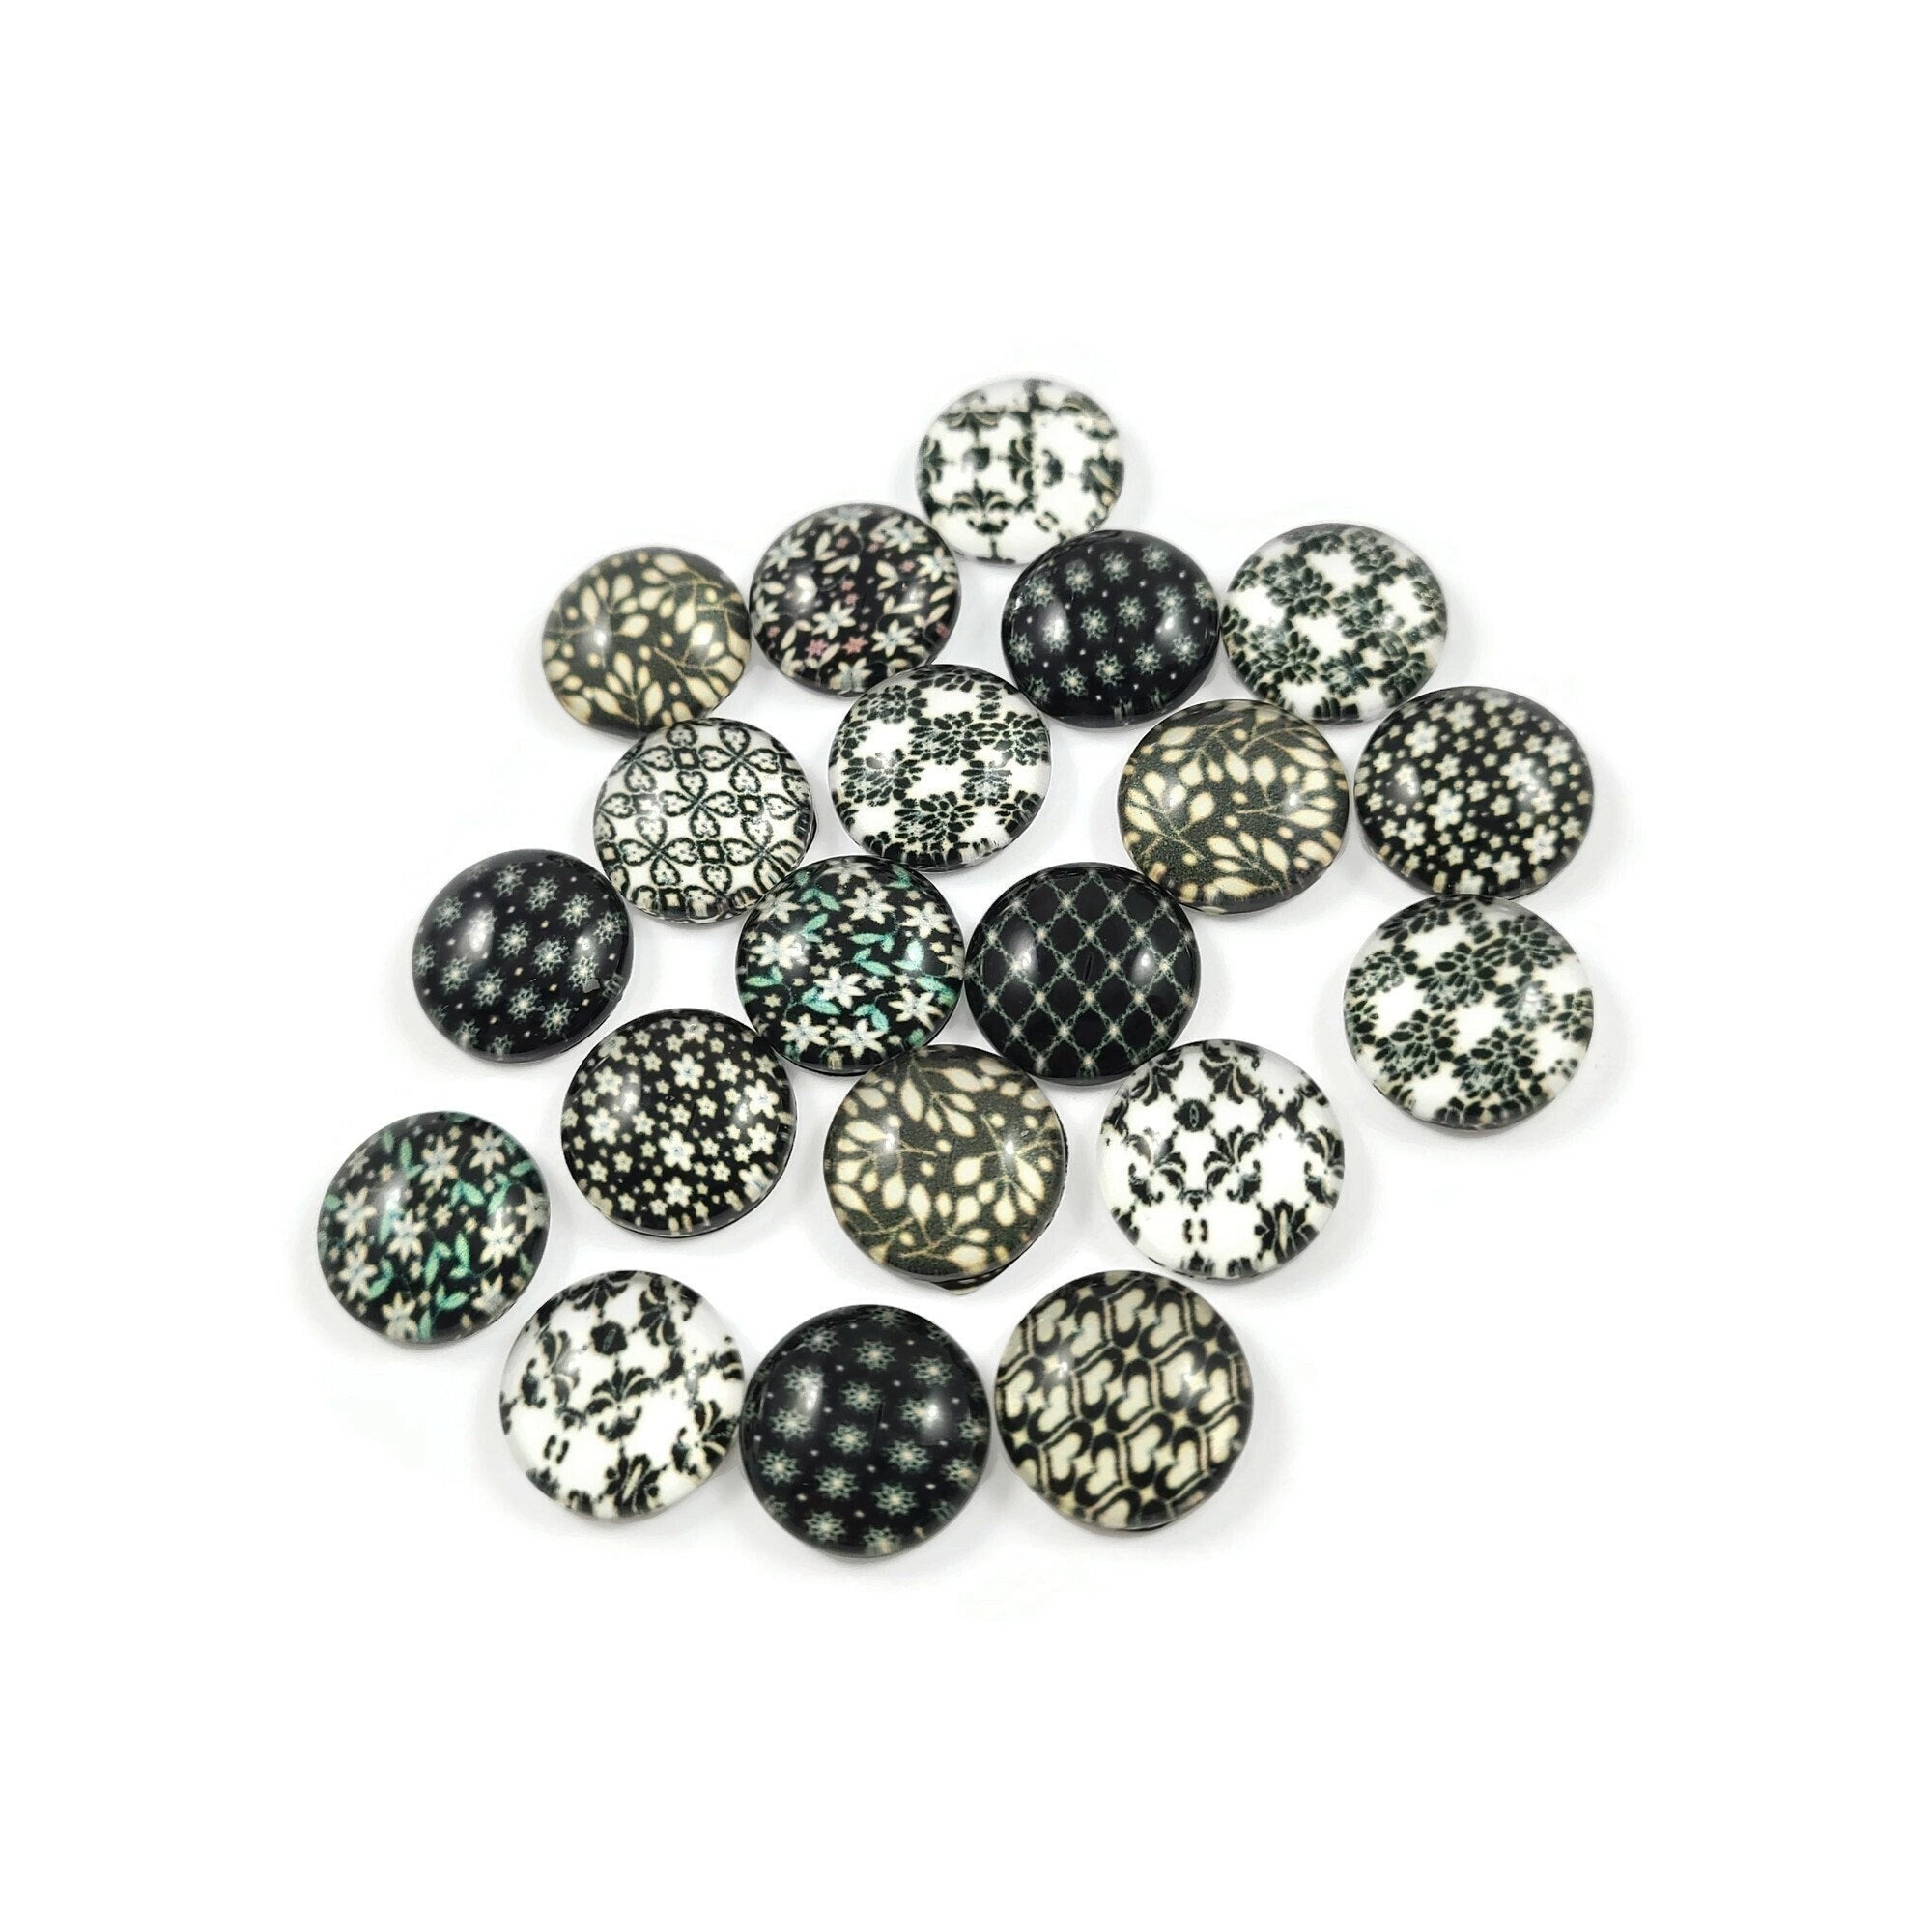 Mixed black floral glass cabochons - set of 20 round dome cabochons - 12mm